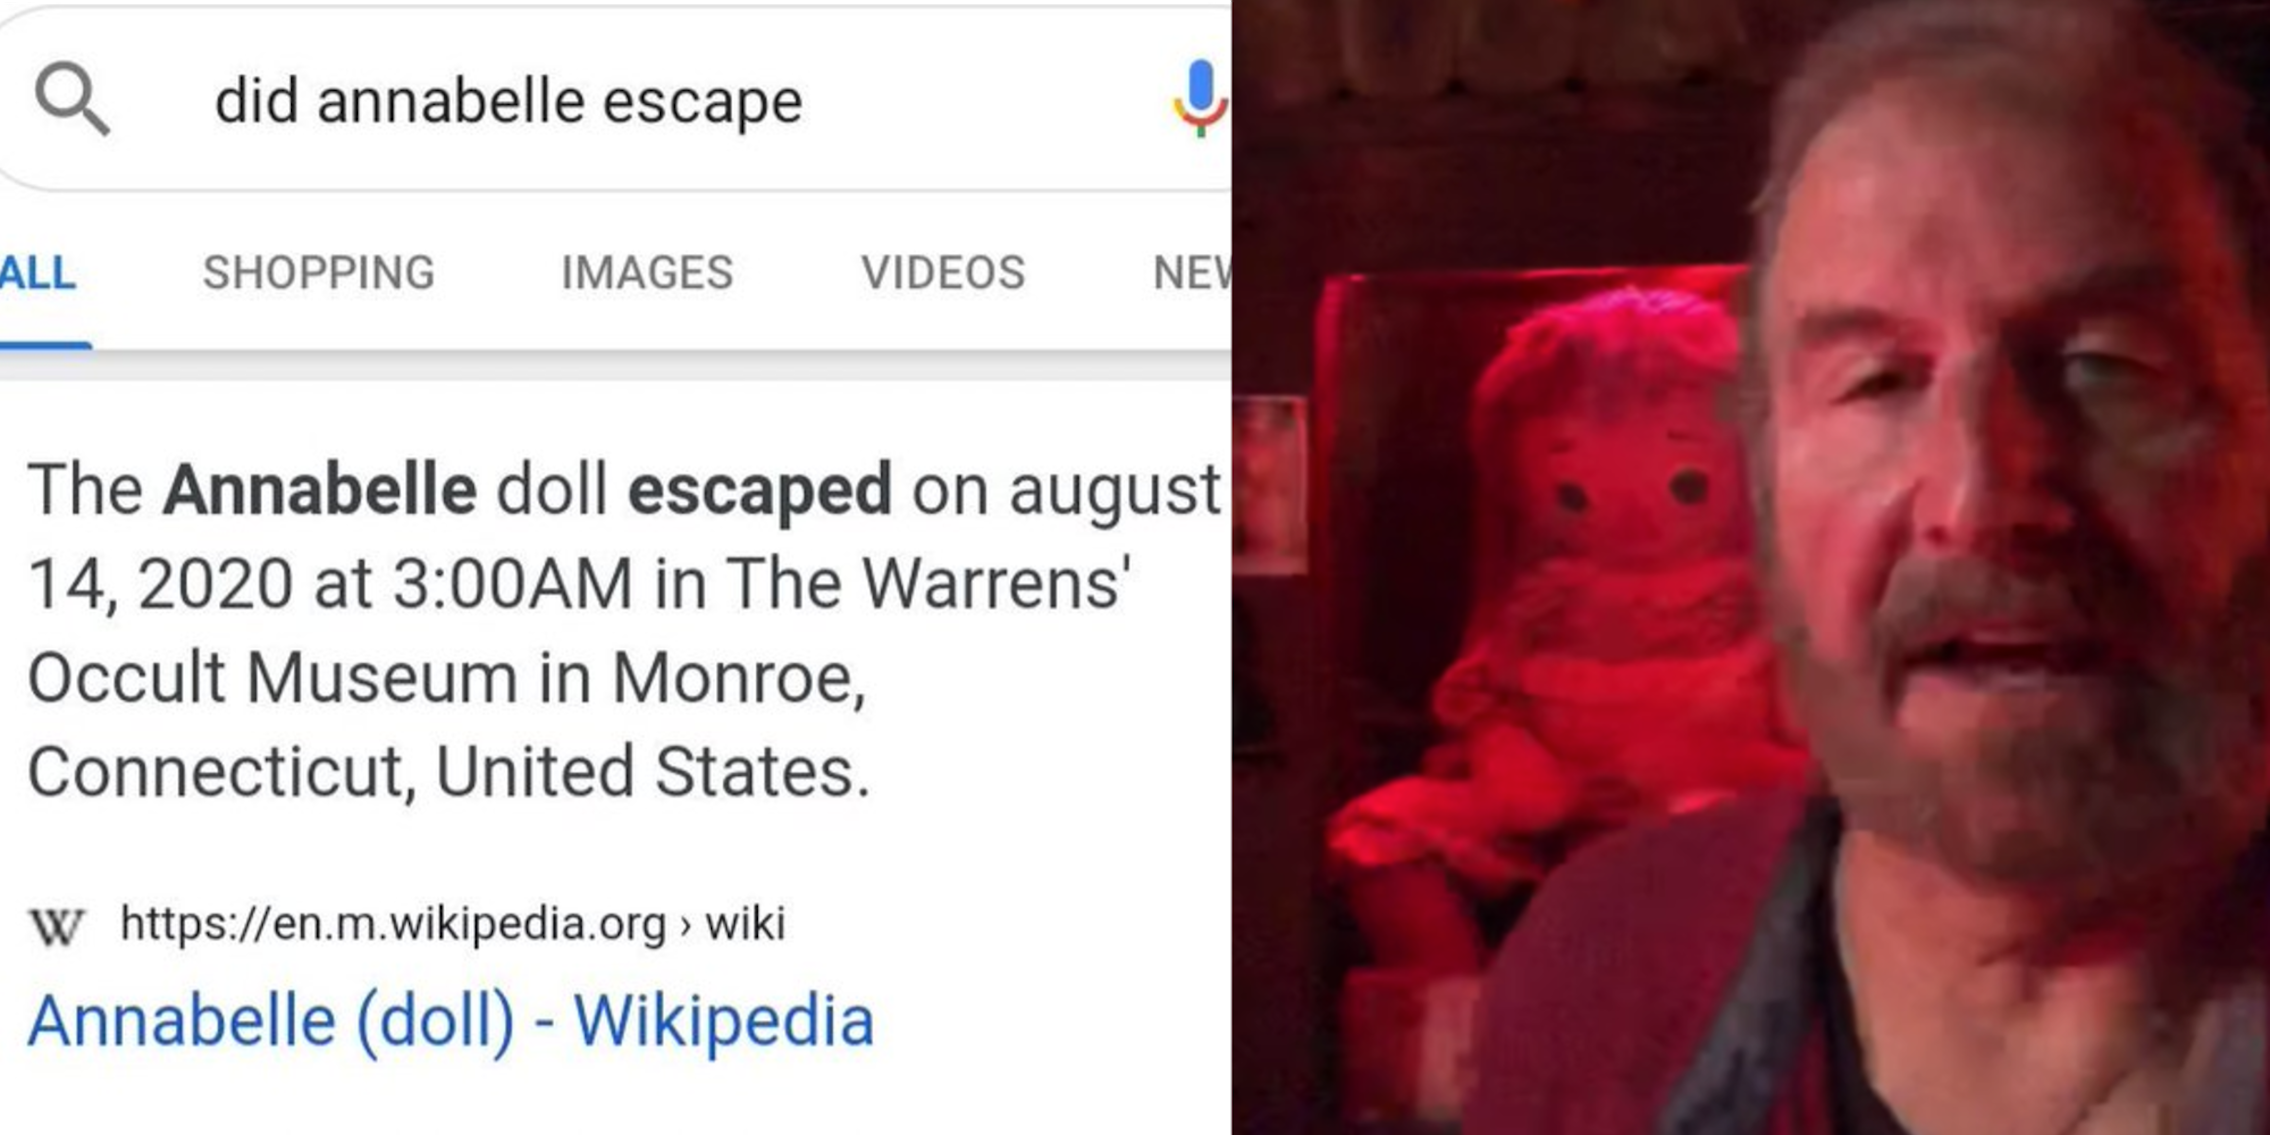 How A Wikipedia Page Fueled Viral Rumor That Annabelle Doll Escaped